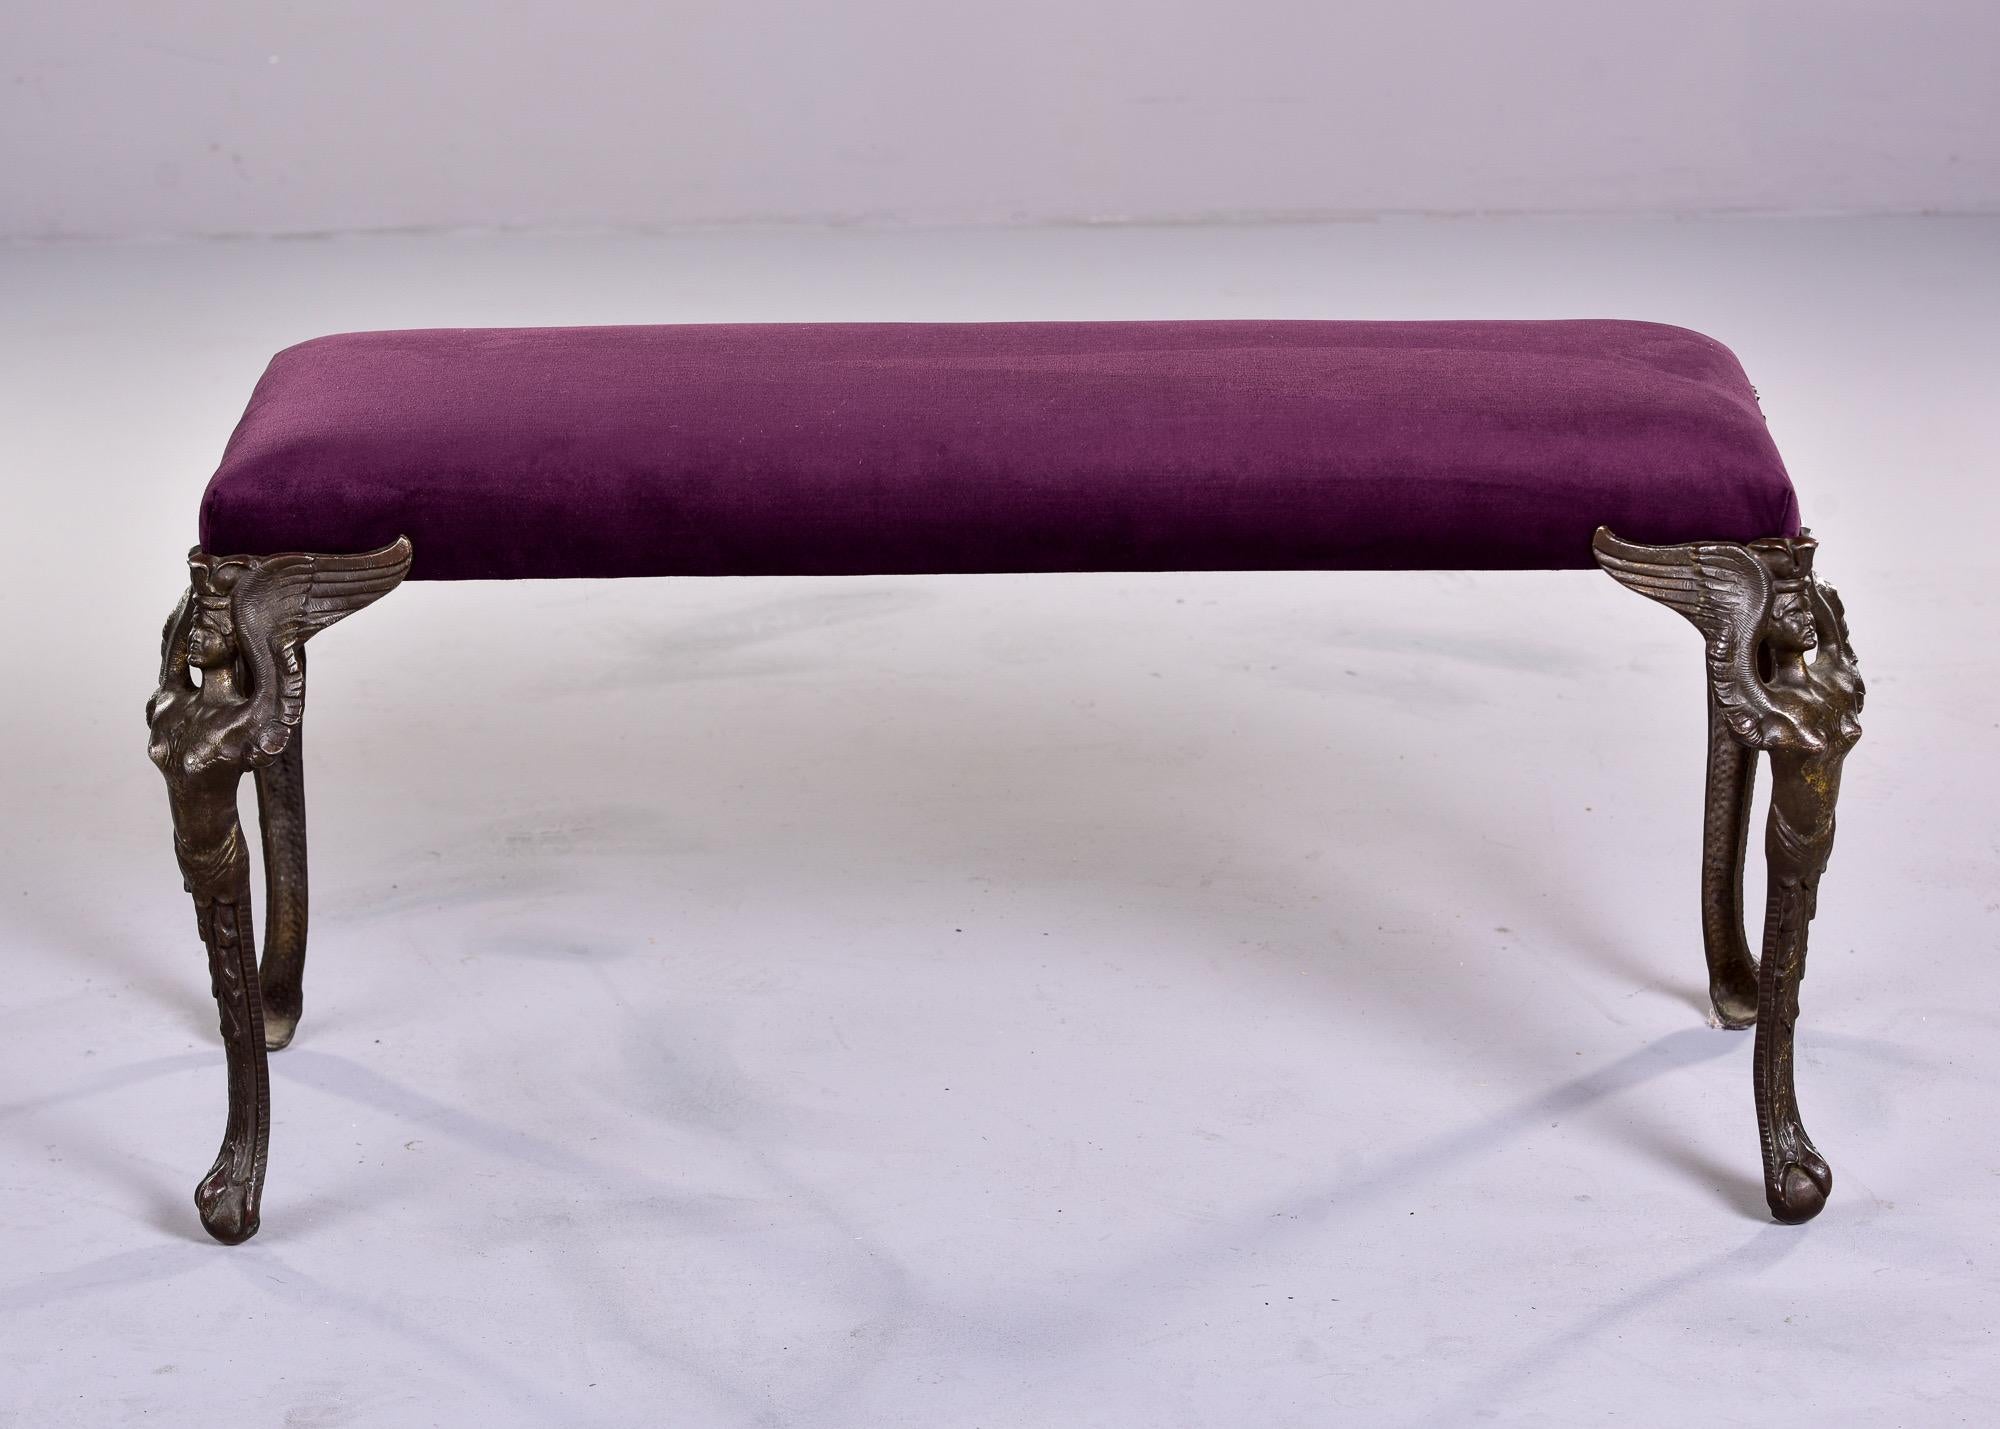 Found in the US, this circa 1930s bench features dramatic Art Deco era cast bronze legs of winged female - could be Nike, the goddess of victory. Bench has been reupholstered in aubergine velvet fabric. Unknown maker.
 